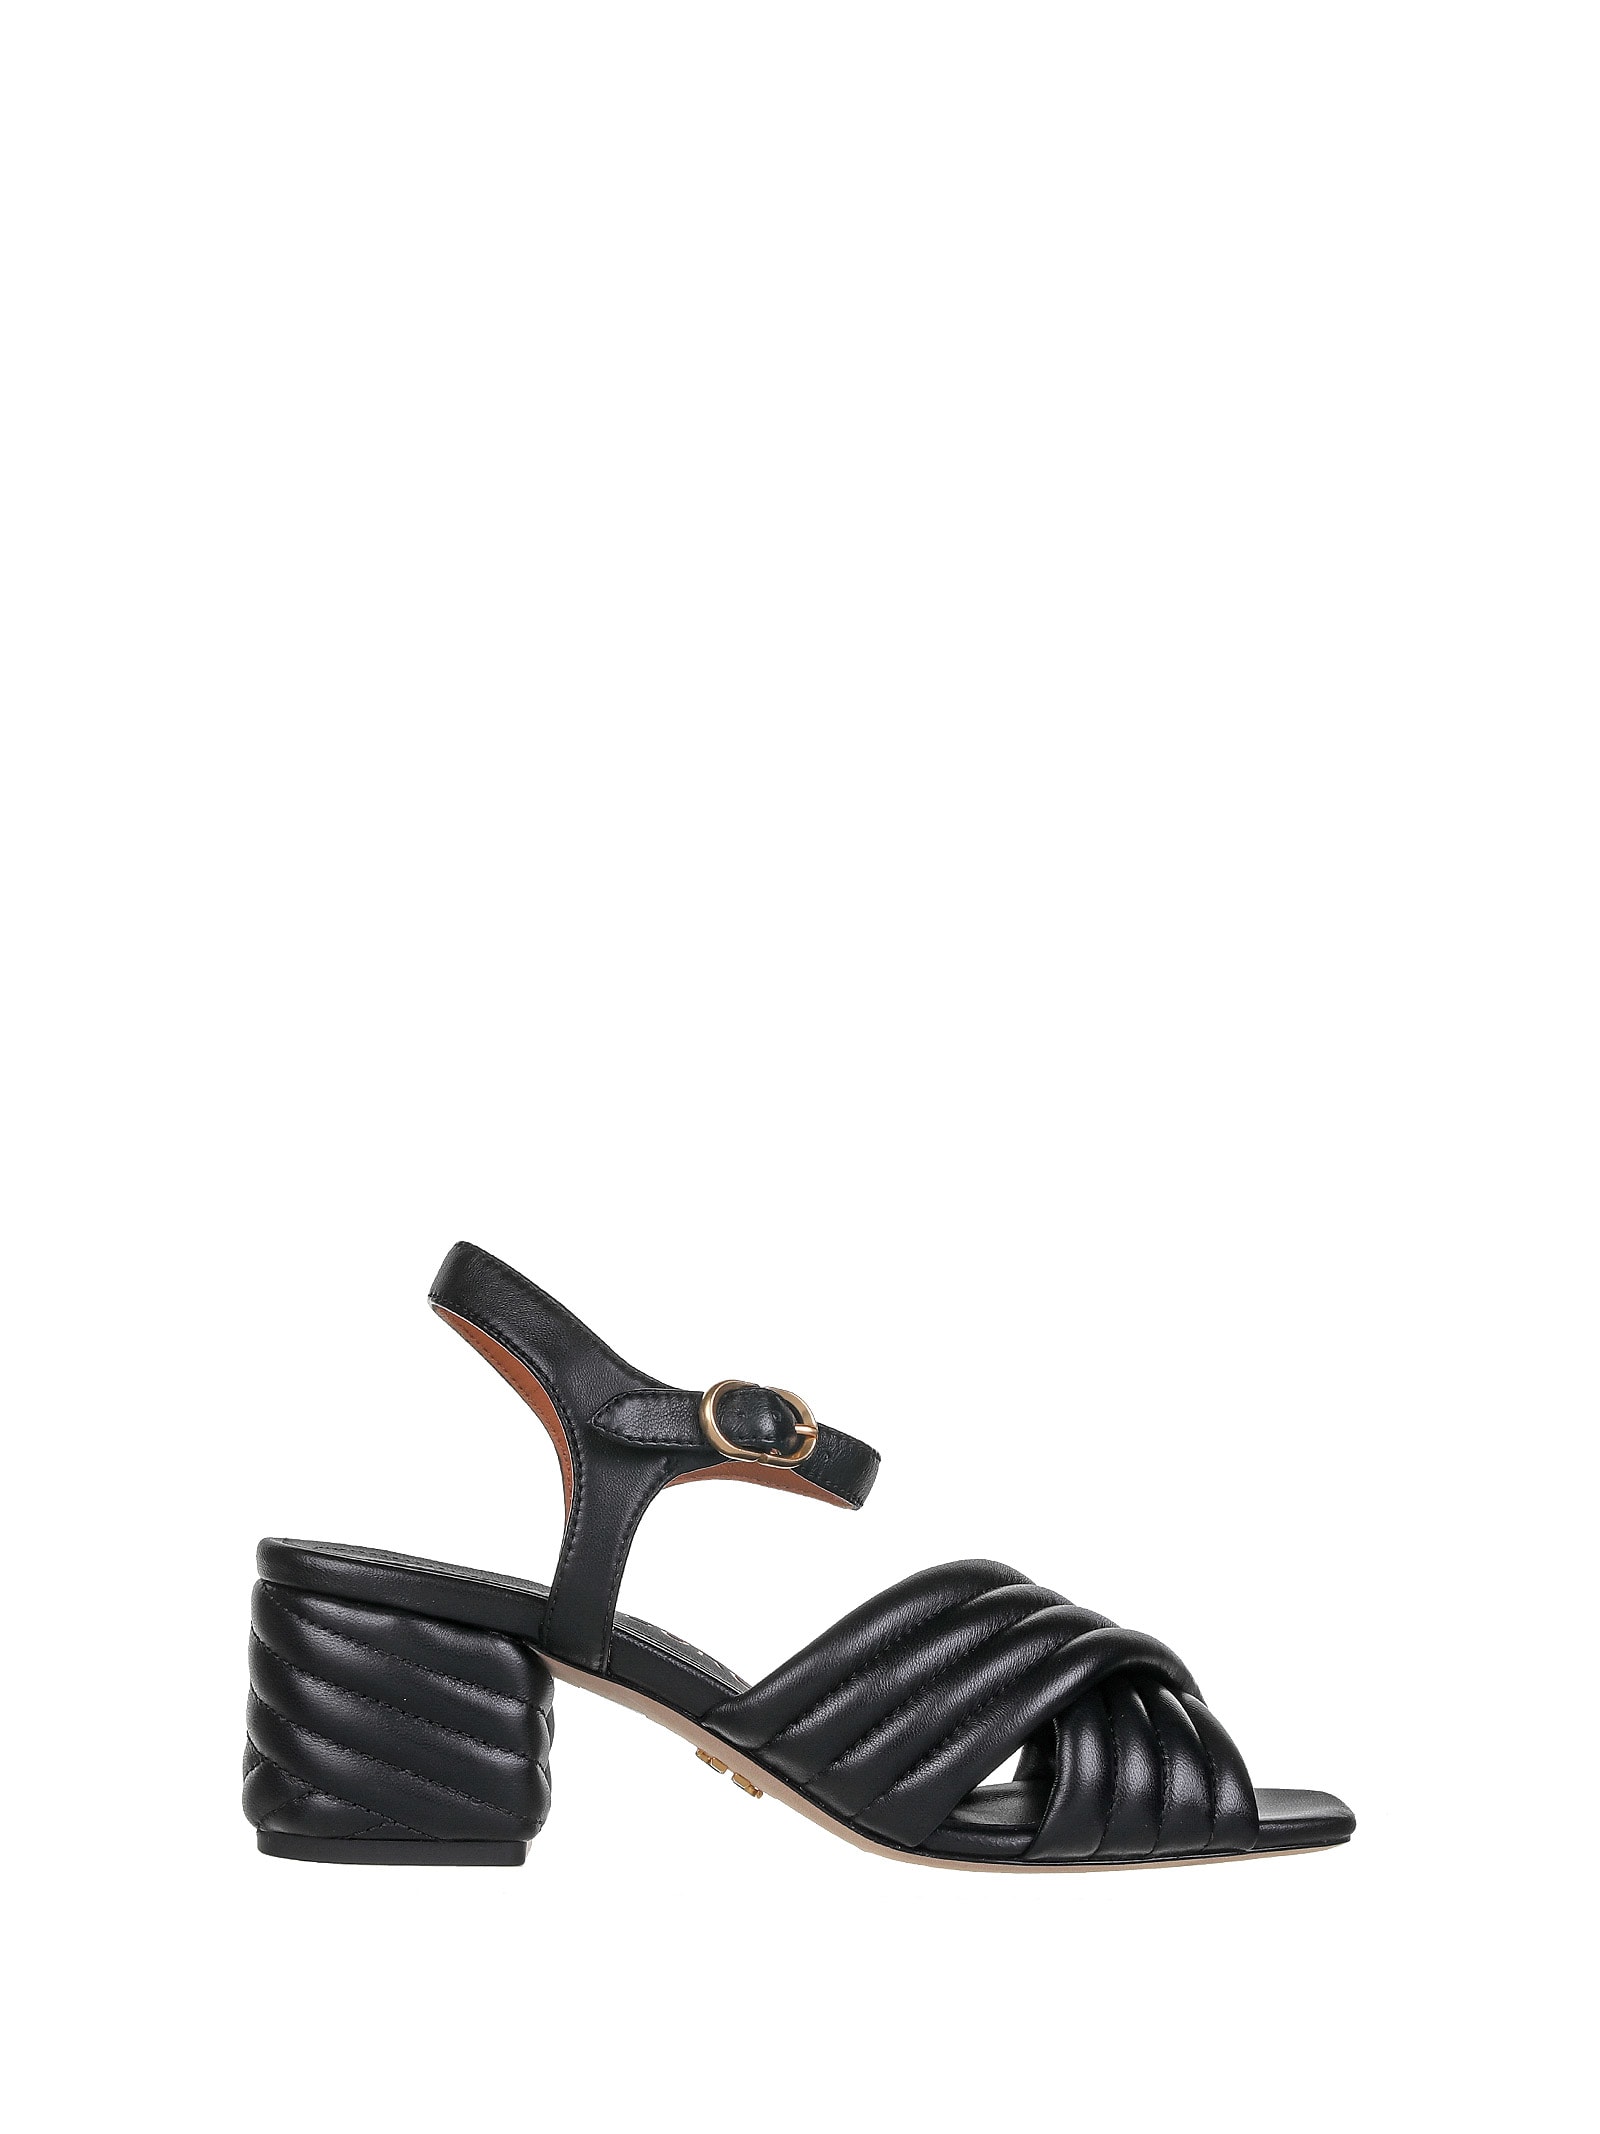 Photo of  Tory Burch Tory Burch Crossover Sandals- shop Tory Burch Sandals online sales